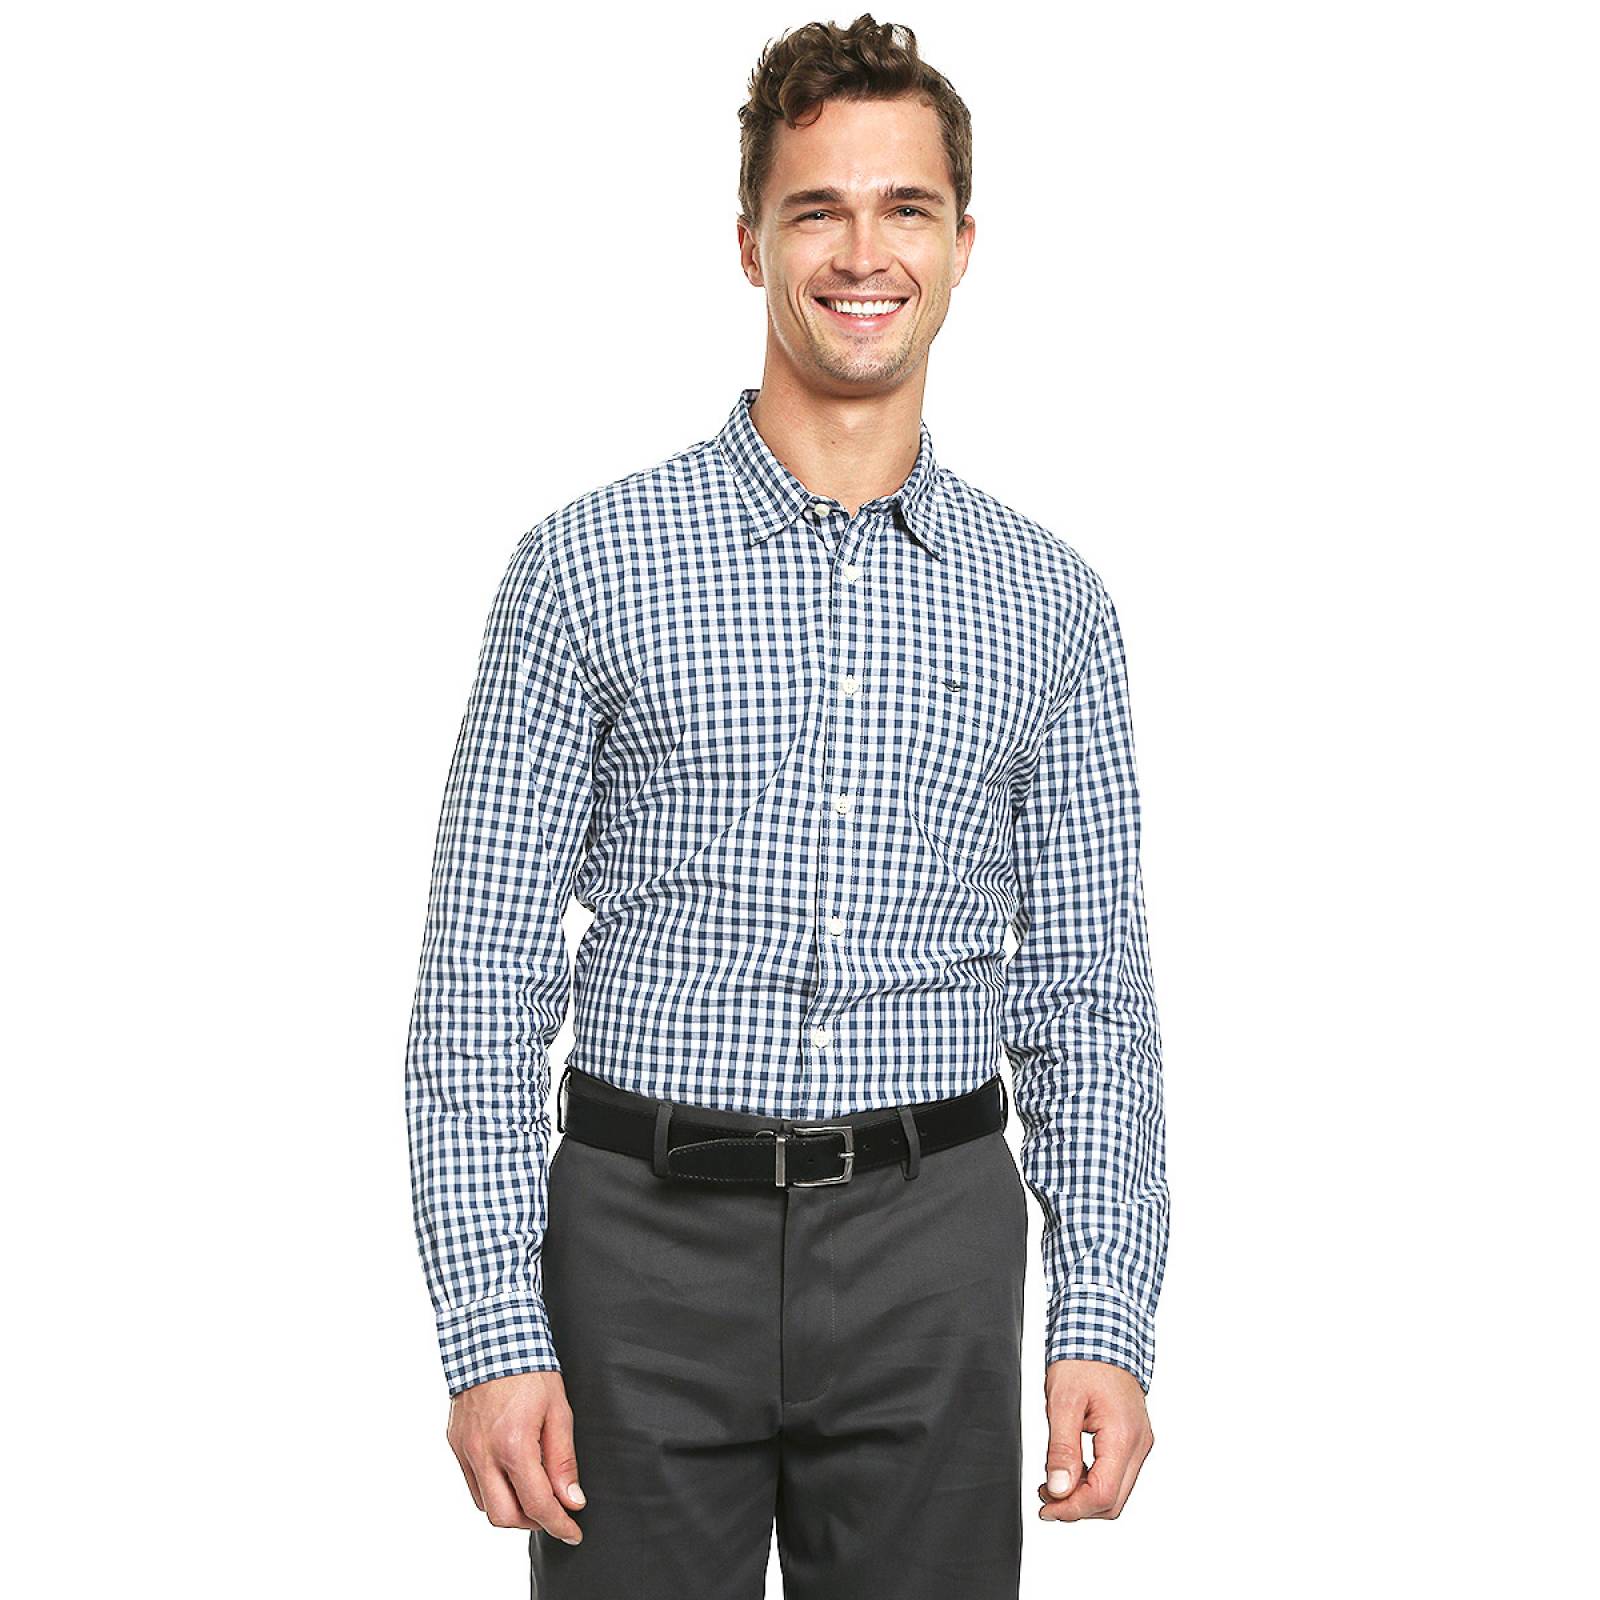 Camisa Laundered Fitted Lg Gingham Moonlit para Caballero